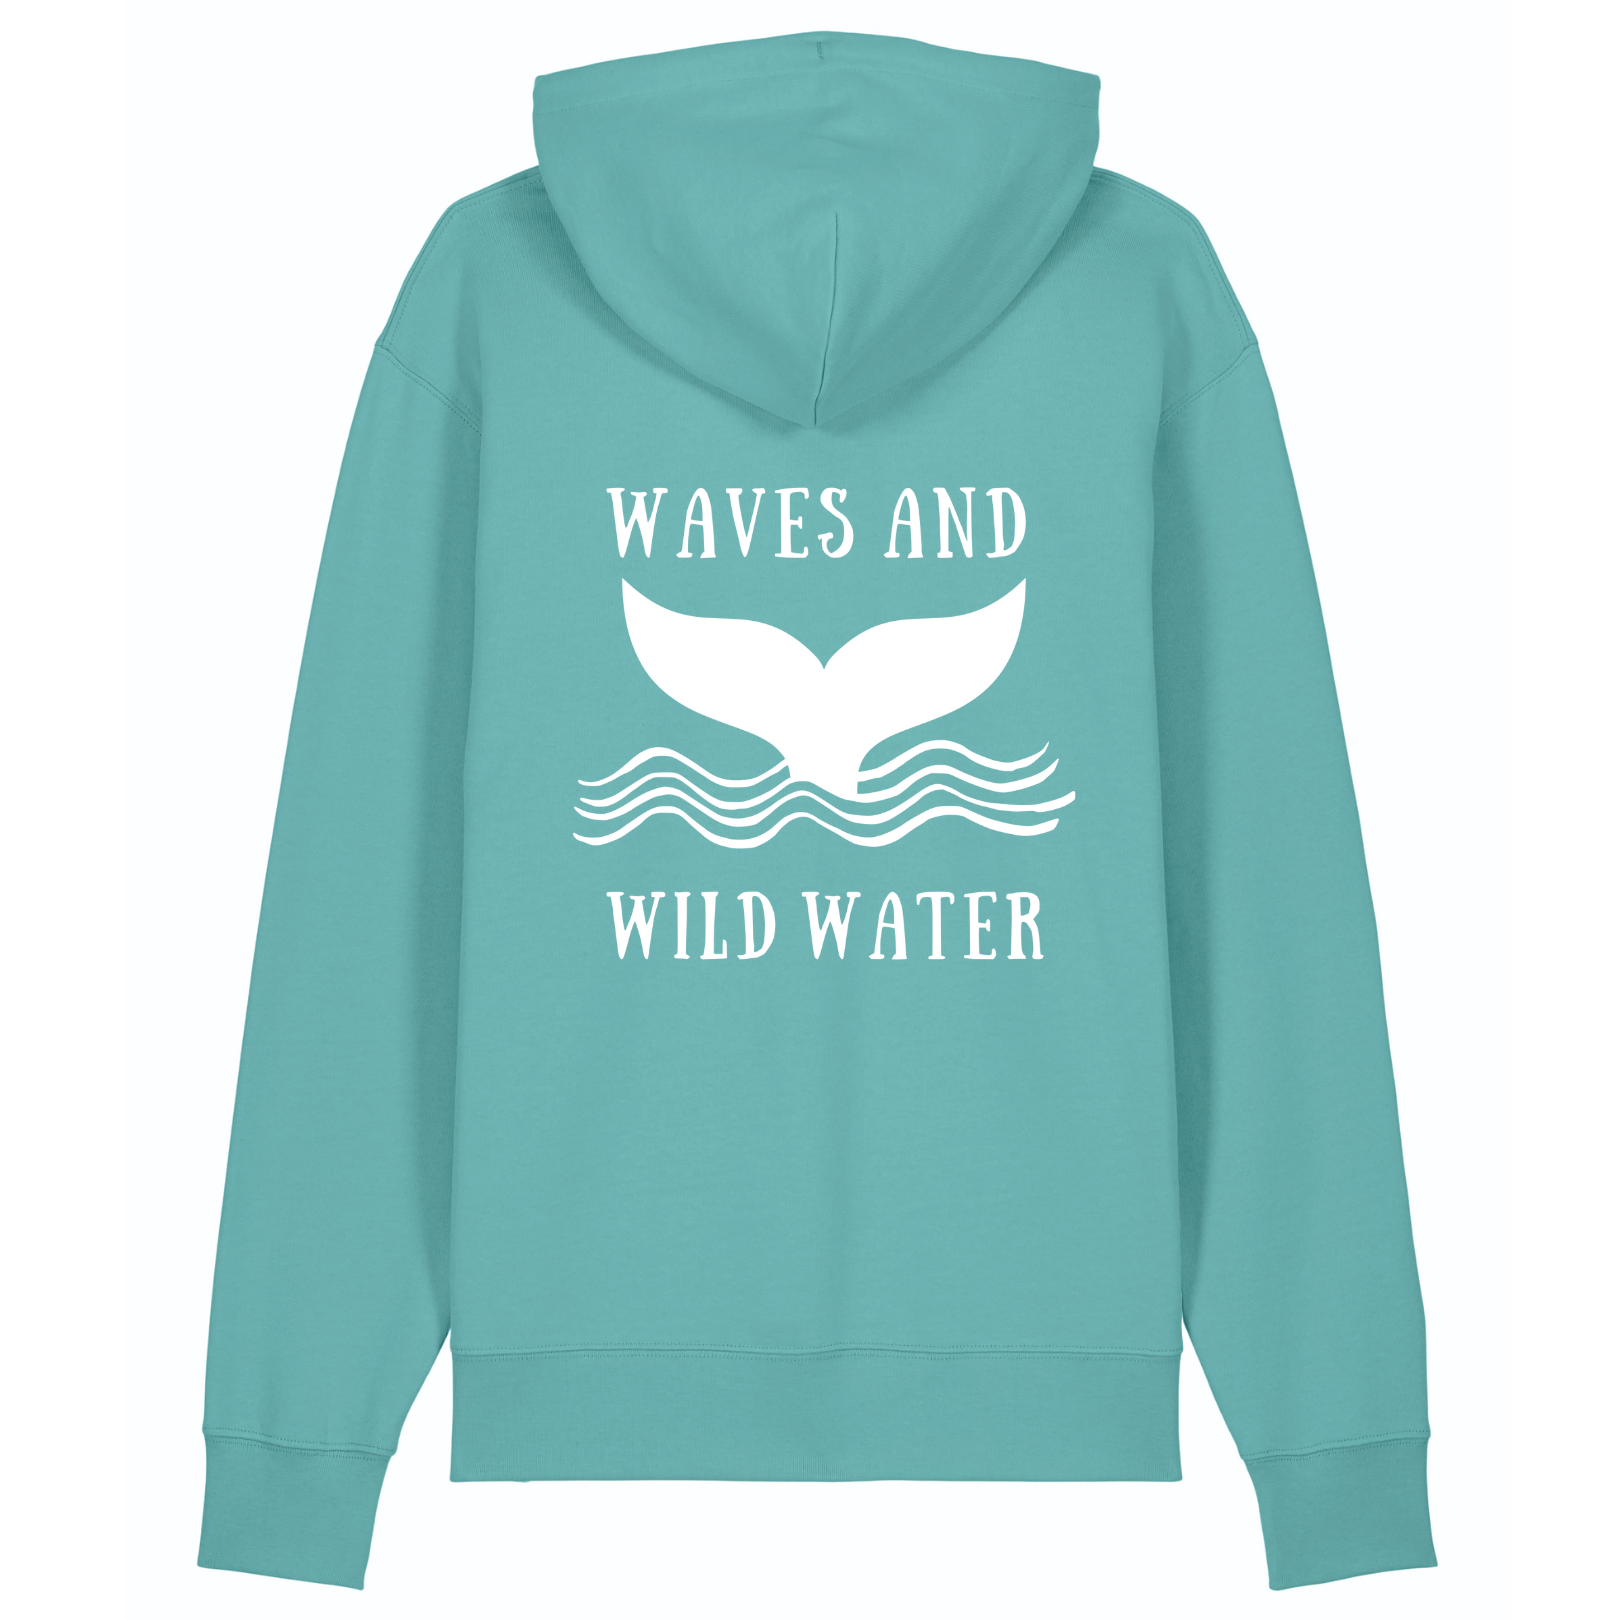 We love this new Waves and Wild Water hoodie from the Beach Hut Hoodies collection. The teal hoodie compliments the large white whale tail logo print on the back and is exactly what we want to wear after a day of adventuring on the beach.